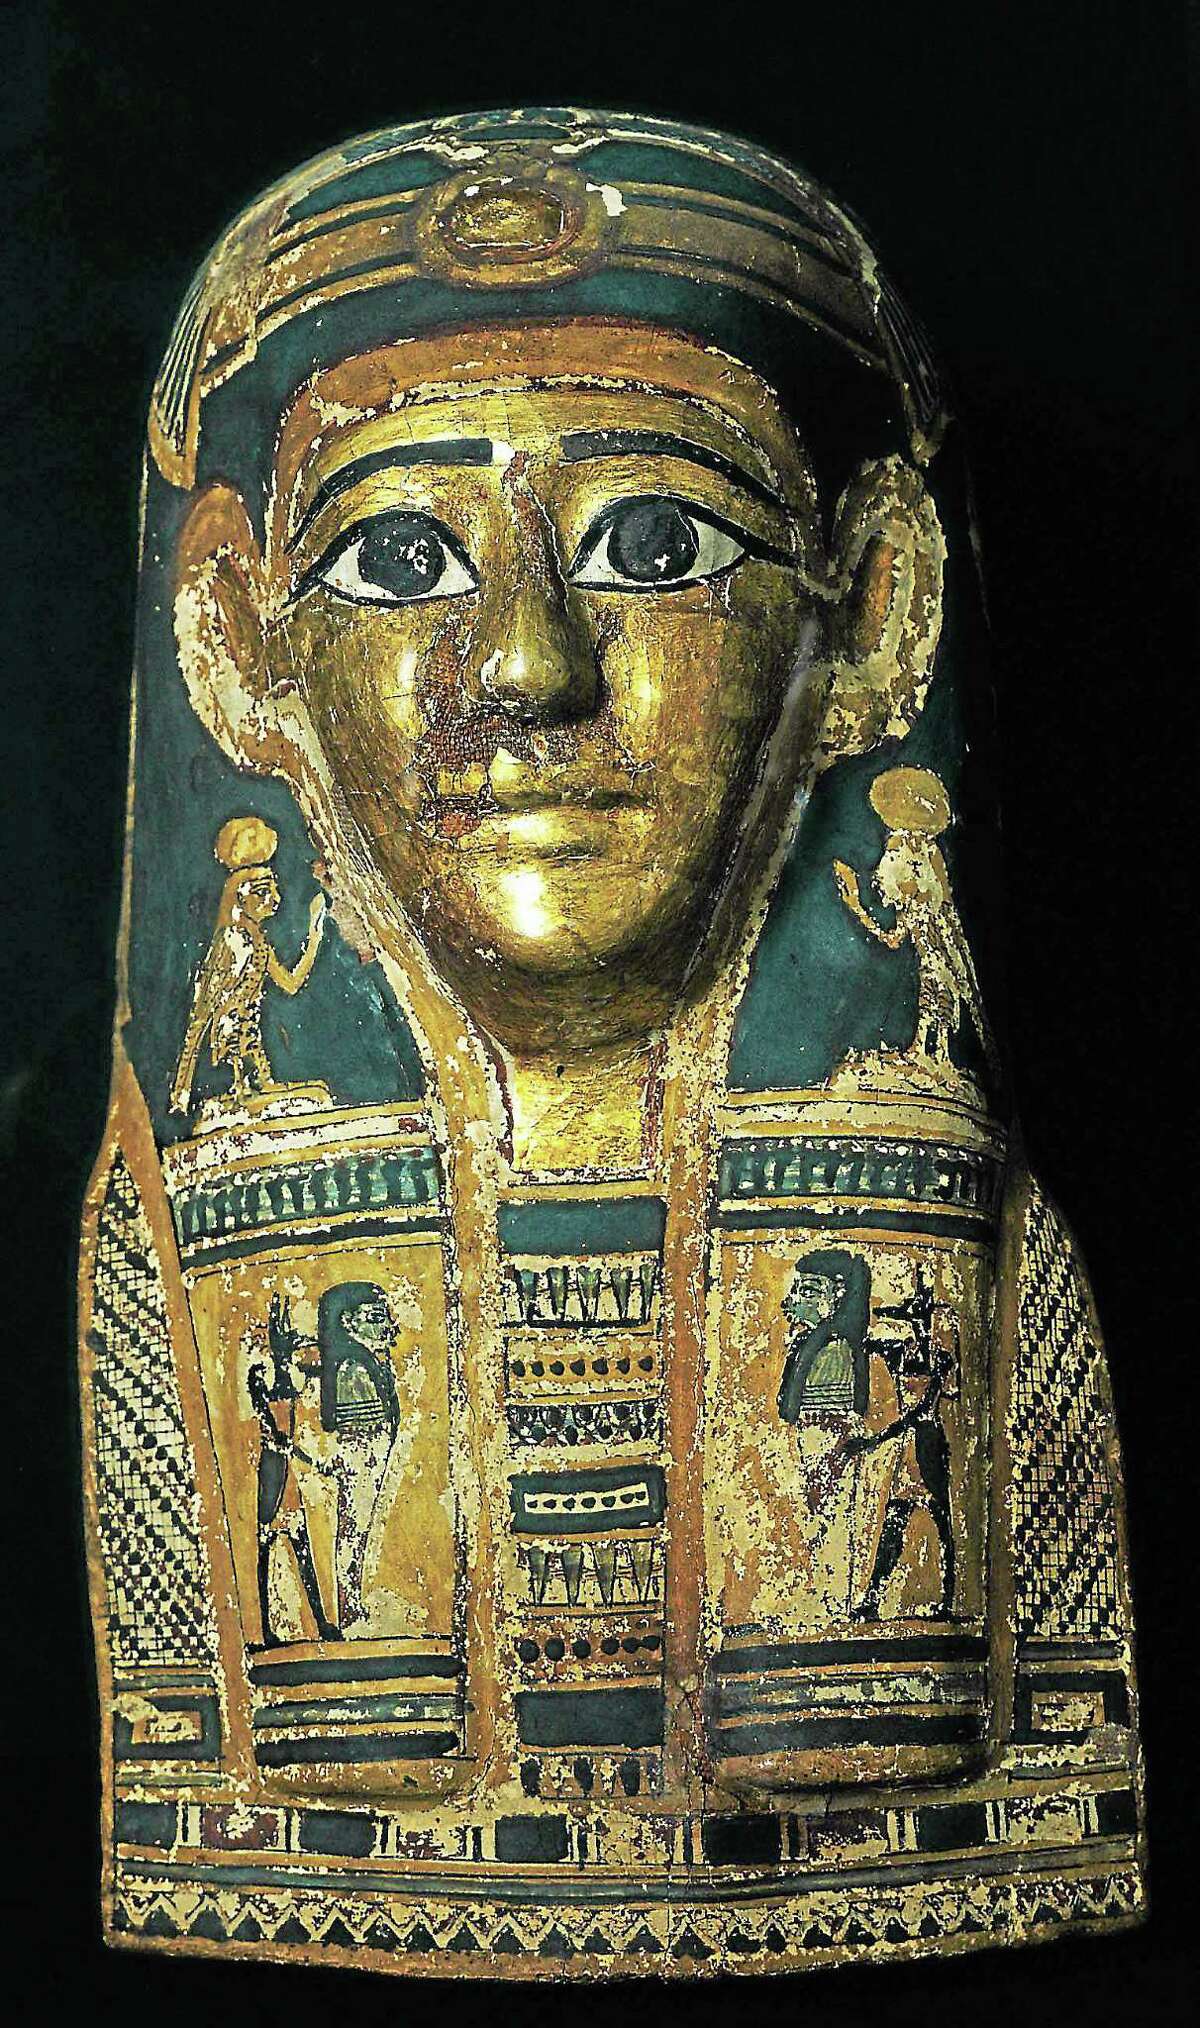 Gilded mummy mask from “Echoes of Egypt.”